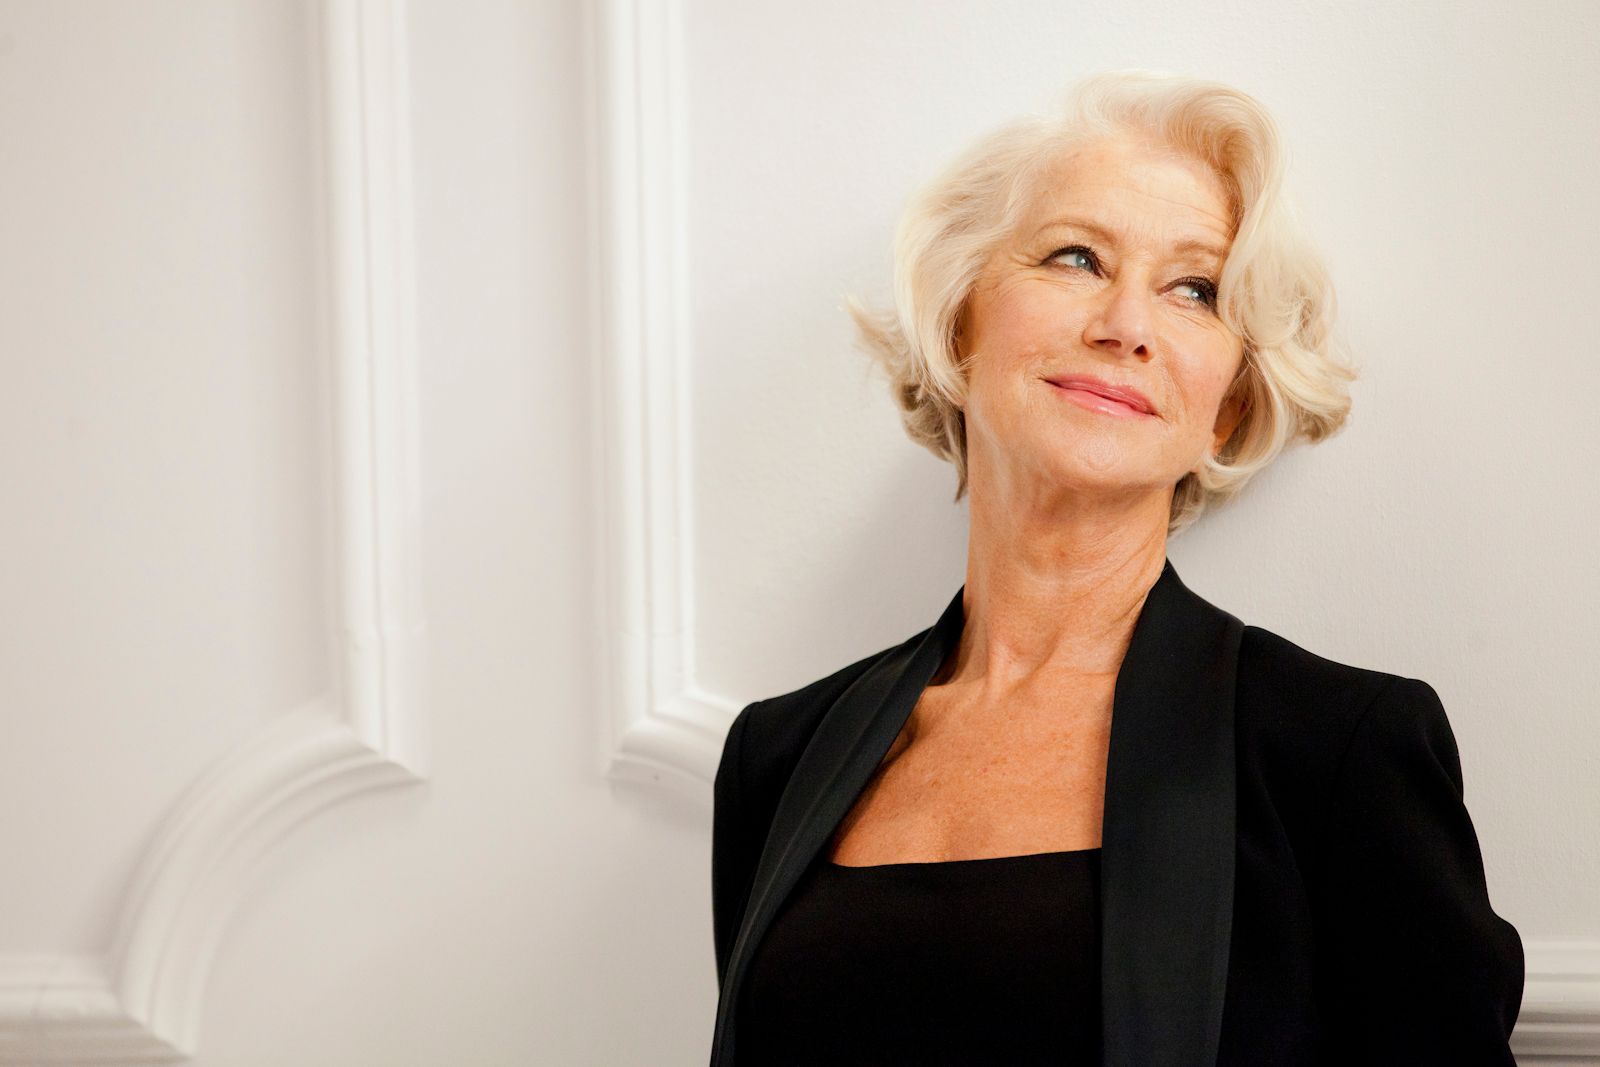 Helen Mirren To Star In 'The Nutcracker and the Four Realms'